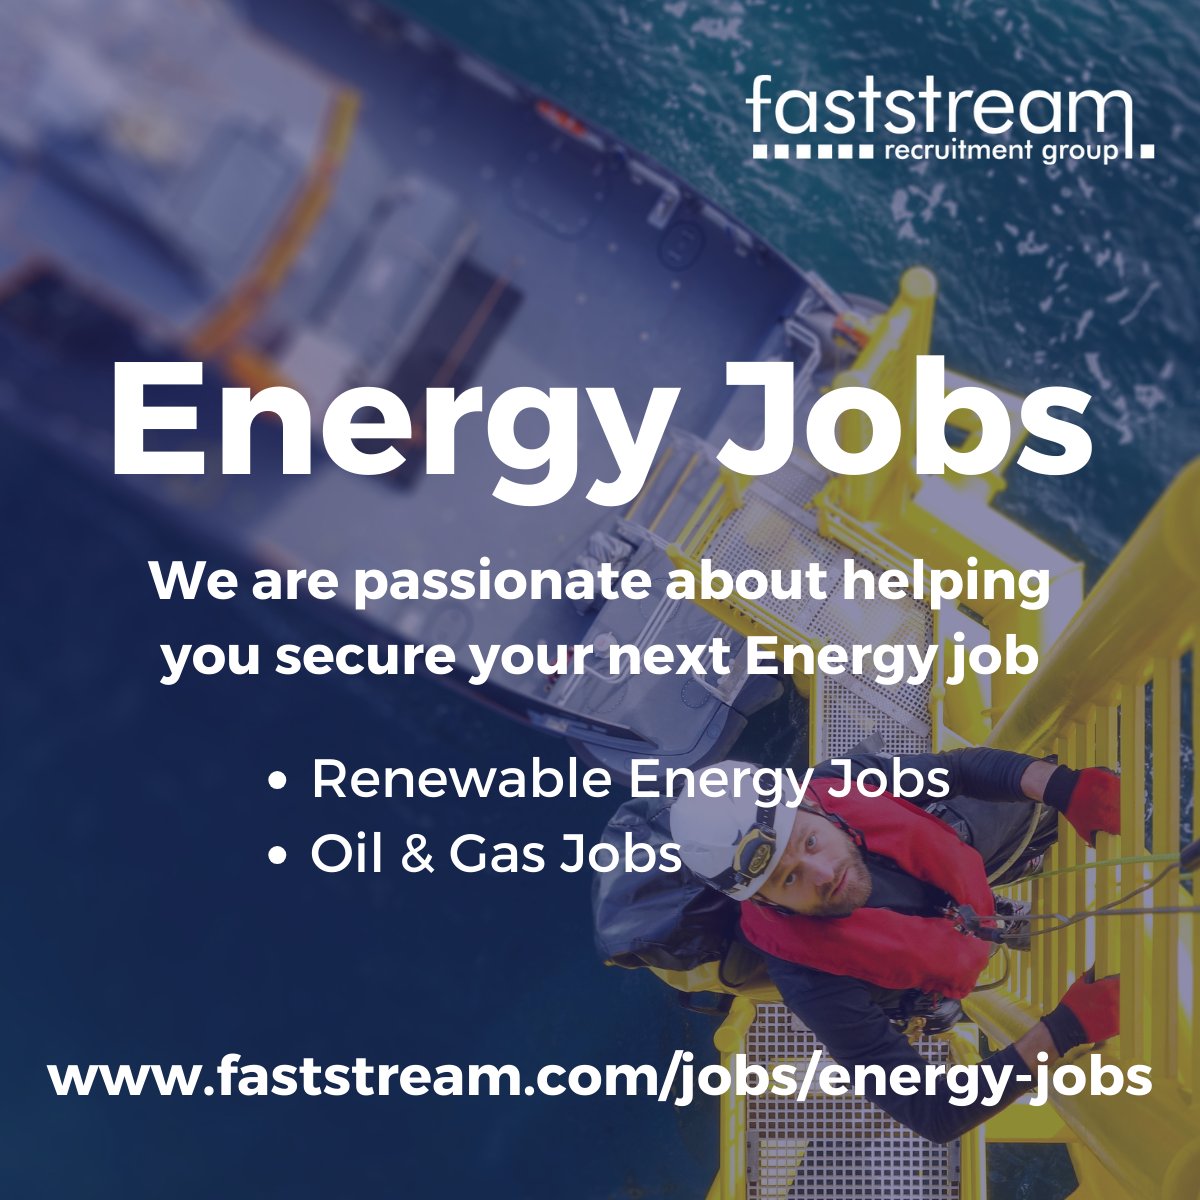 Are you looking to find your dream Energy job, whether it be in Oil & Gas or Renewables?

See our full list of Energy jobs here faststream.com/jobs/energy-jo…

#energyjobs #renewable #energy